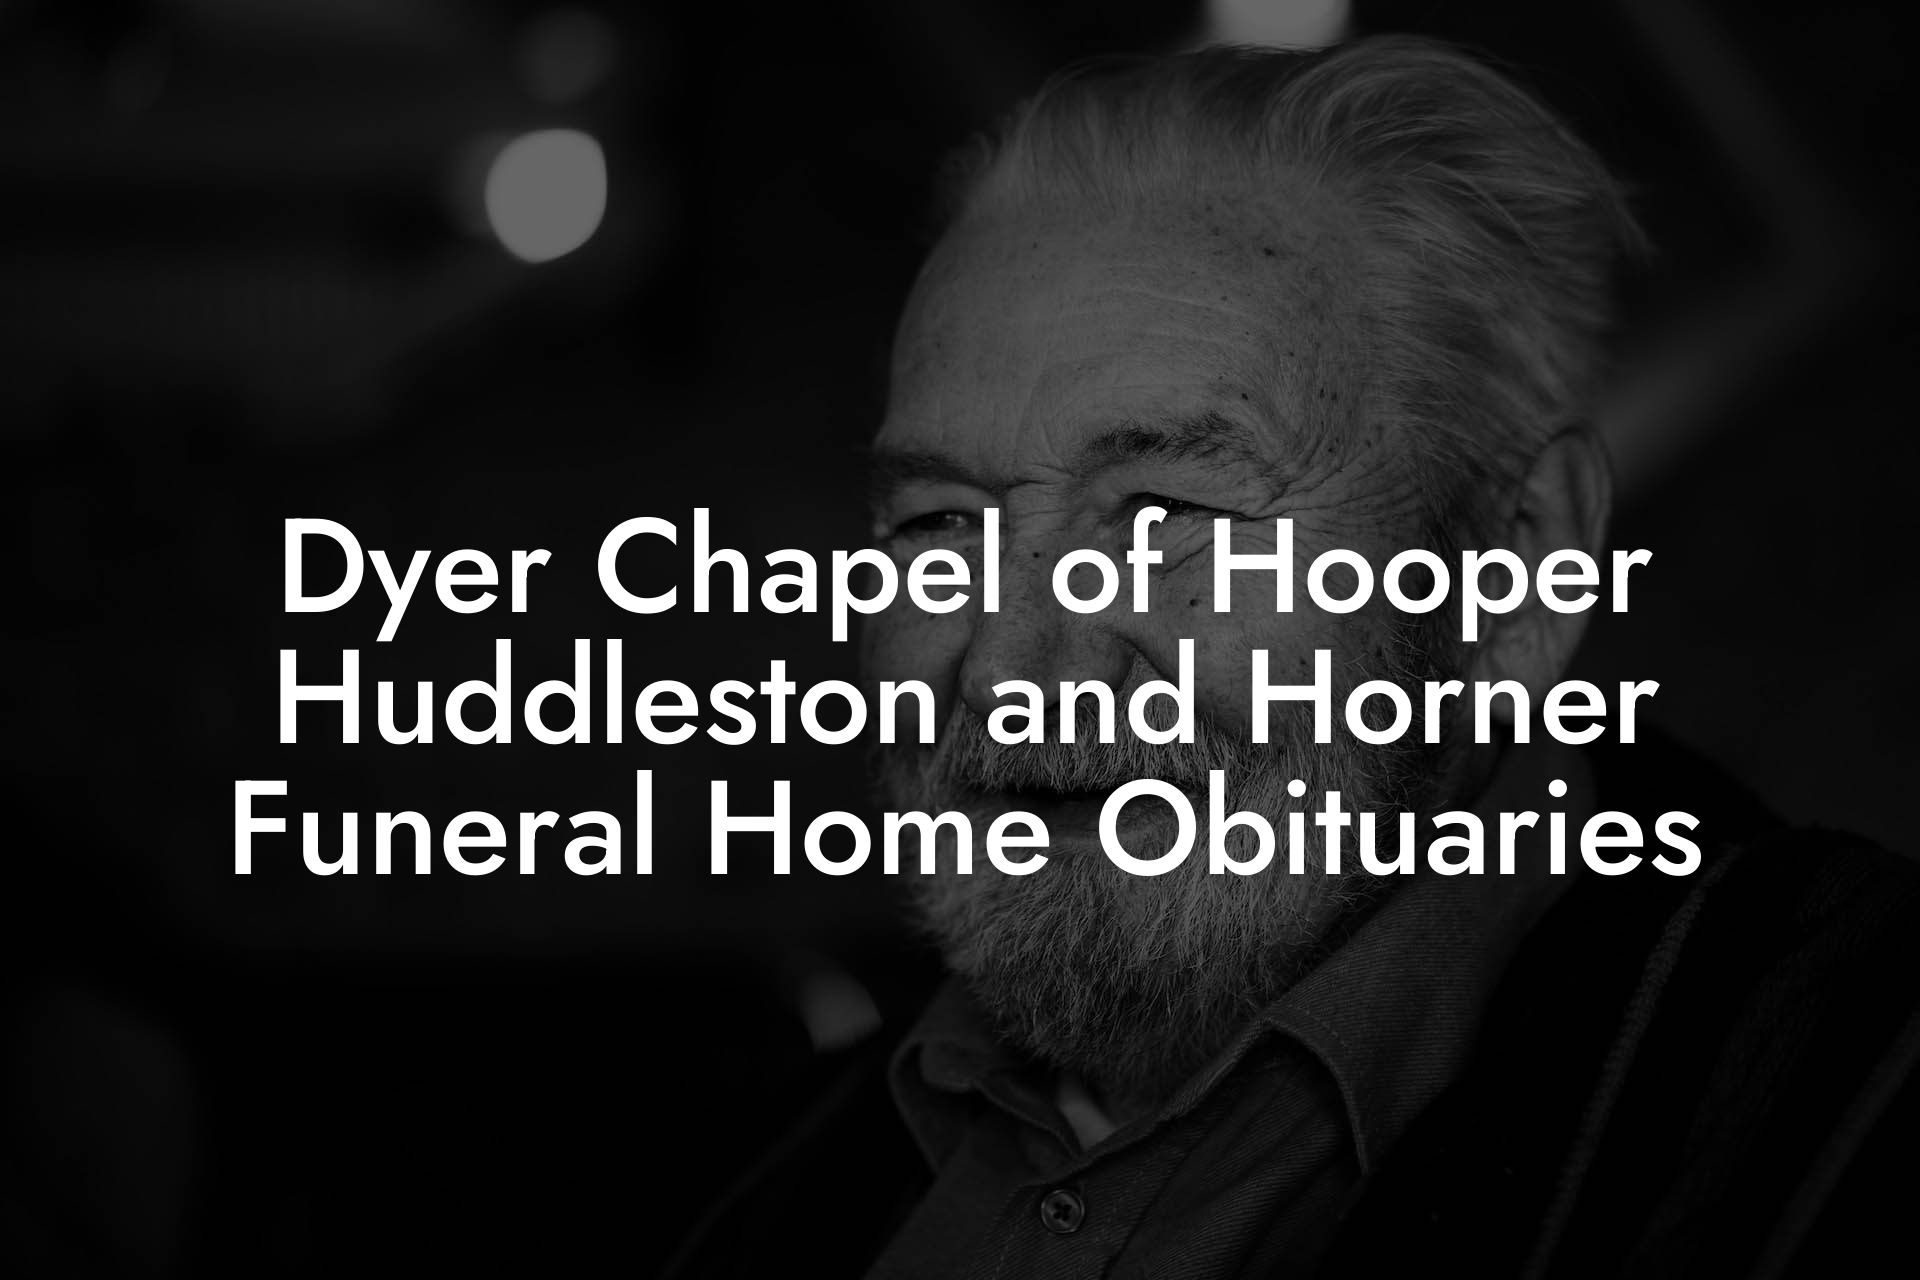 Dyer Chapel of Hooper Huddleston and Horner Funeral Home Obituaries